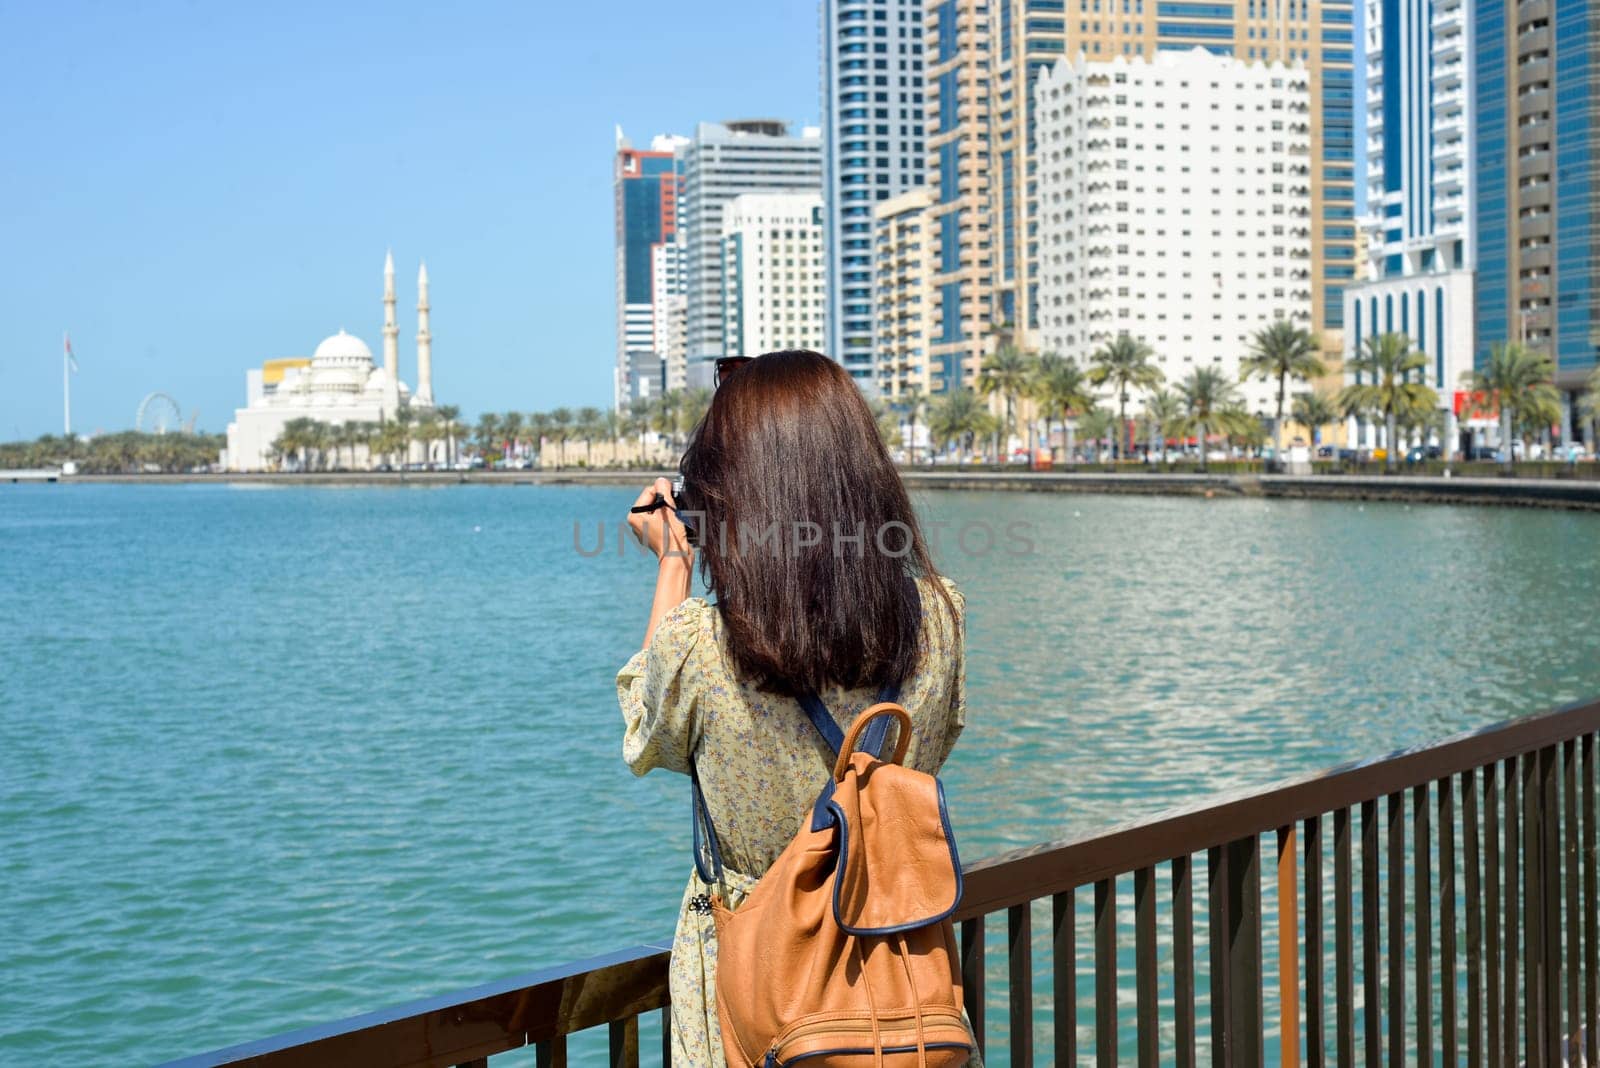 A woman in a long dress with a backpack walks with a camera along the Al Majaz embankment, Lake Khaled, Sharjah emirate. Rear view of a woman photographing the embankment by Ekaterina34